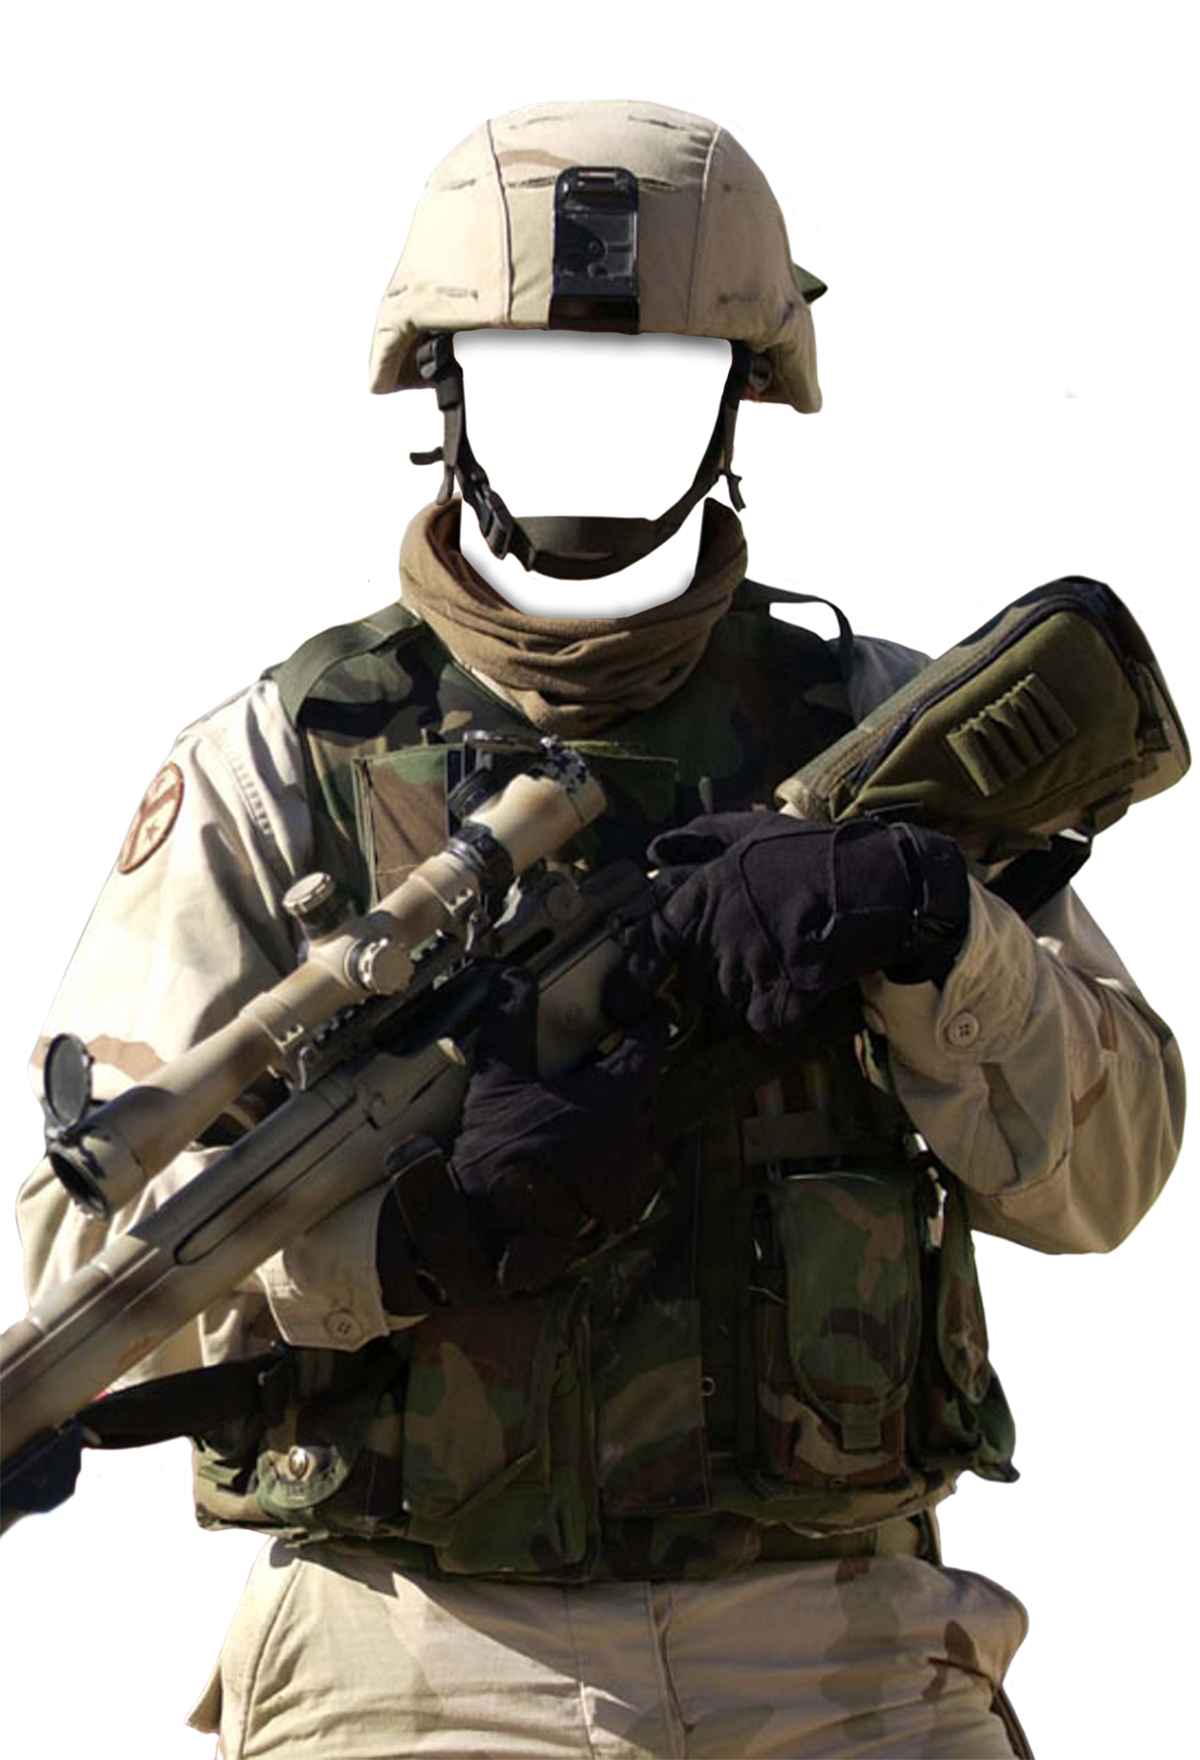 Army PNG Image File